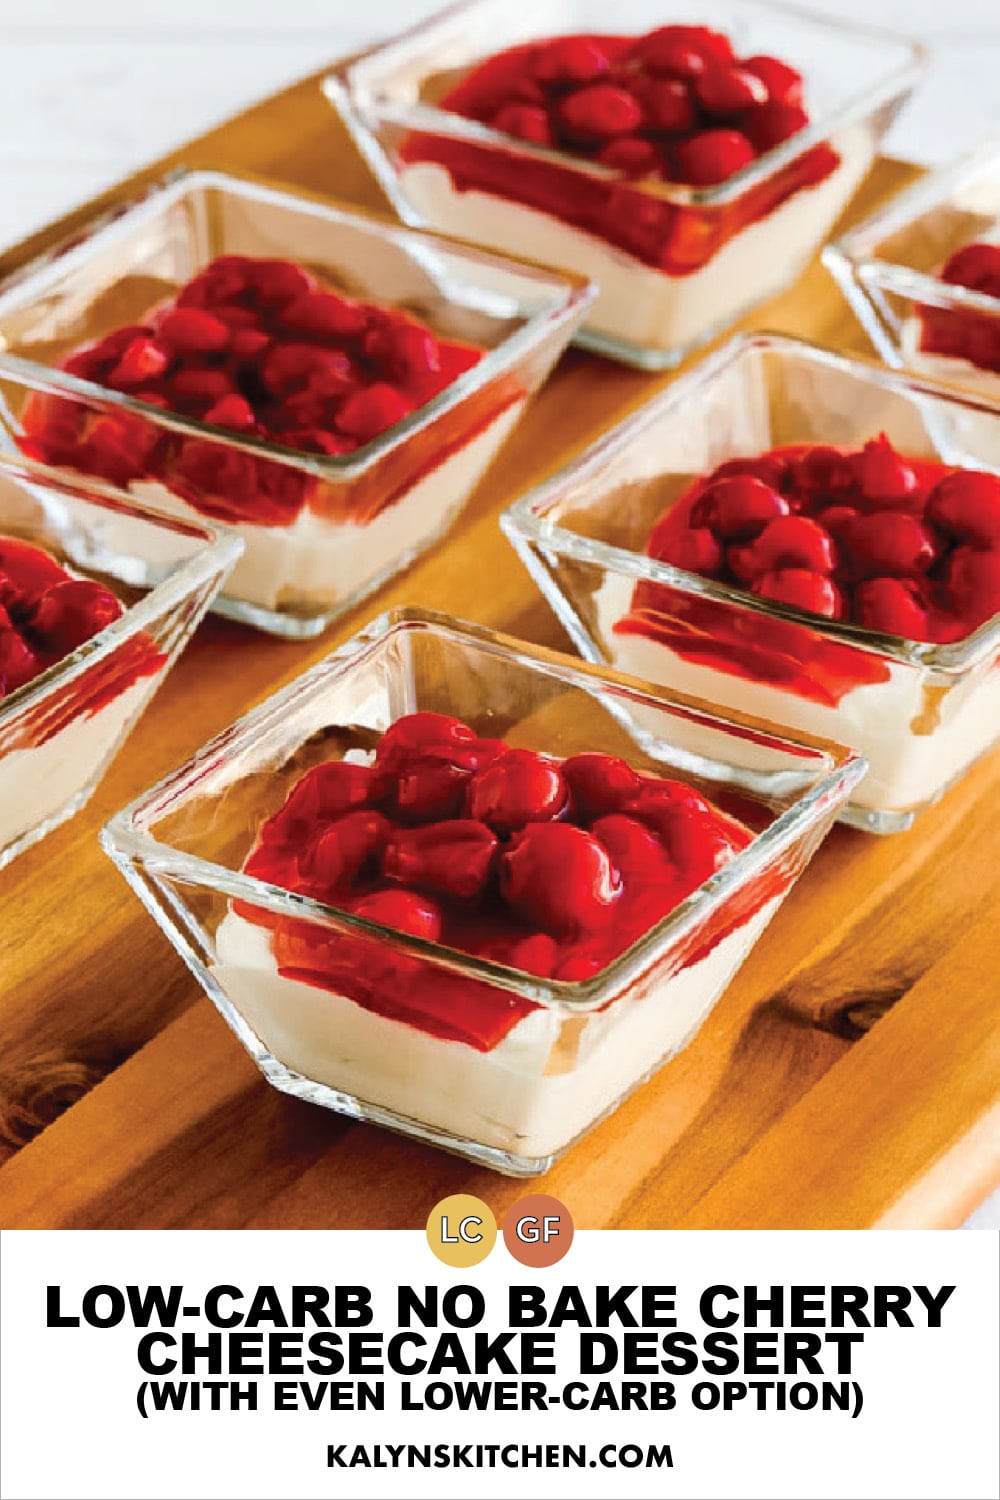 Pinterest image of Low-Carb No Bake Cherry Cheesecake Dessert